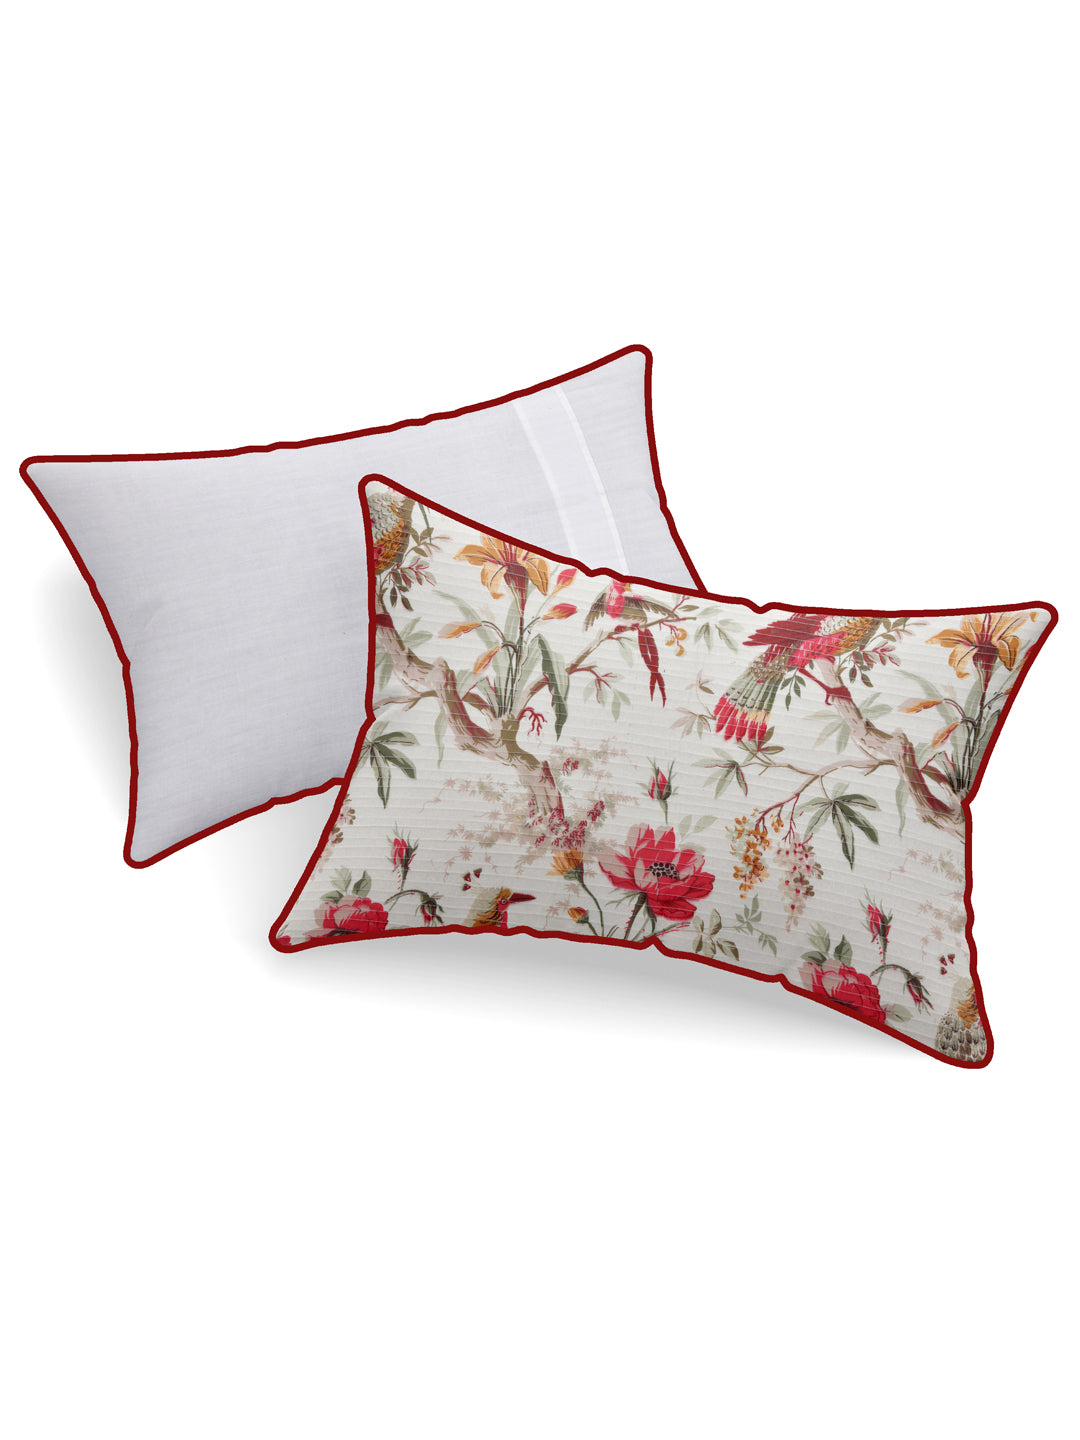 250 TC Cotton Pillow Covers With Piping; Set of 2; Floral & Bird Print